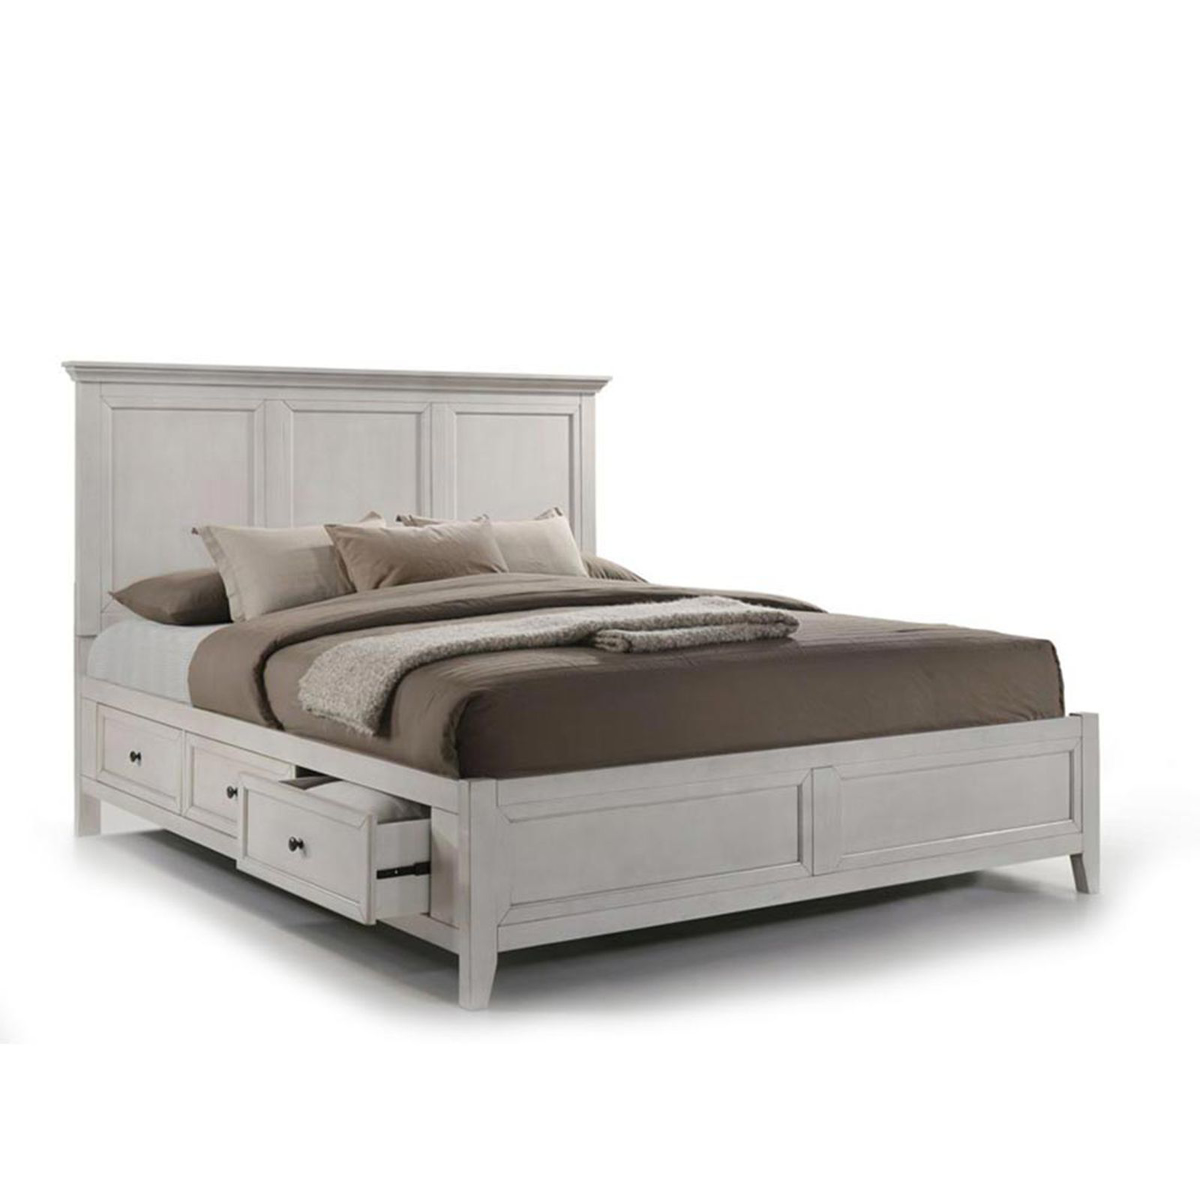 Picture of San Mateo Rustic White King Storage Bed